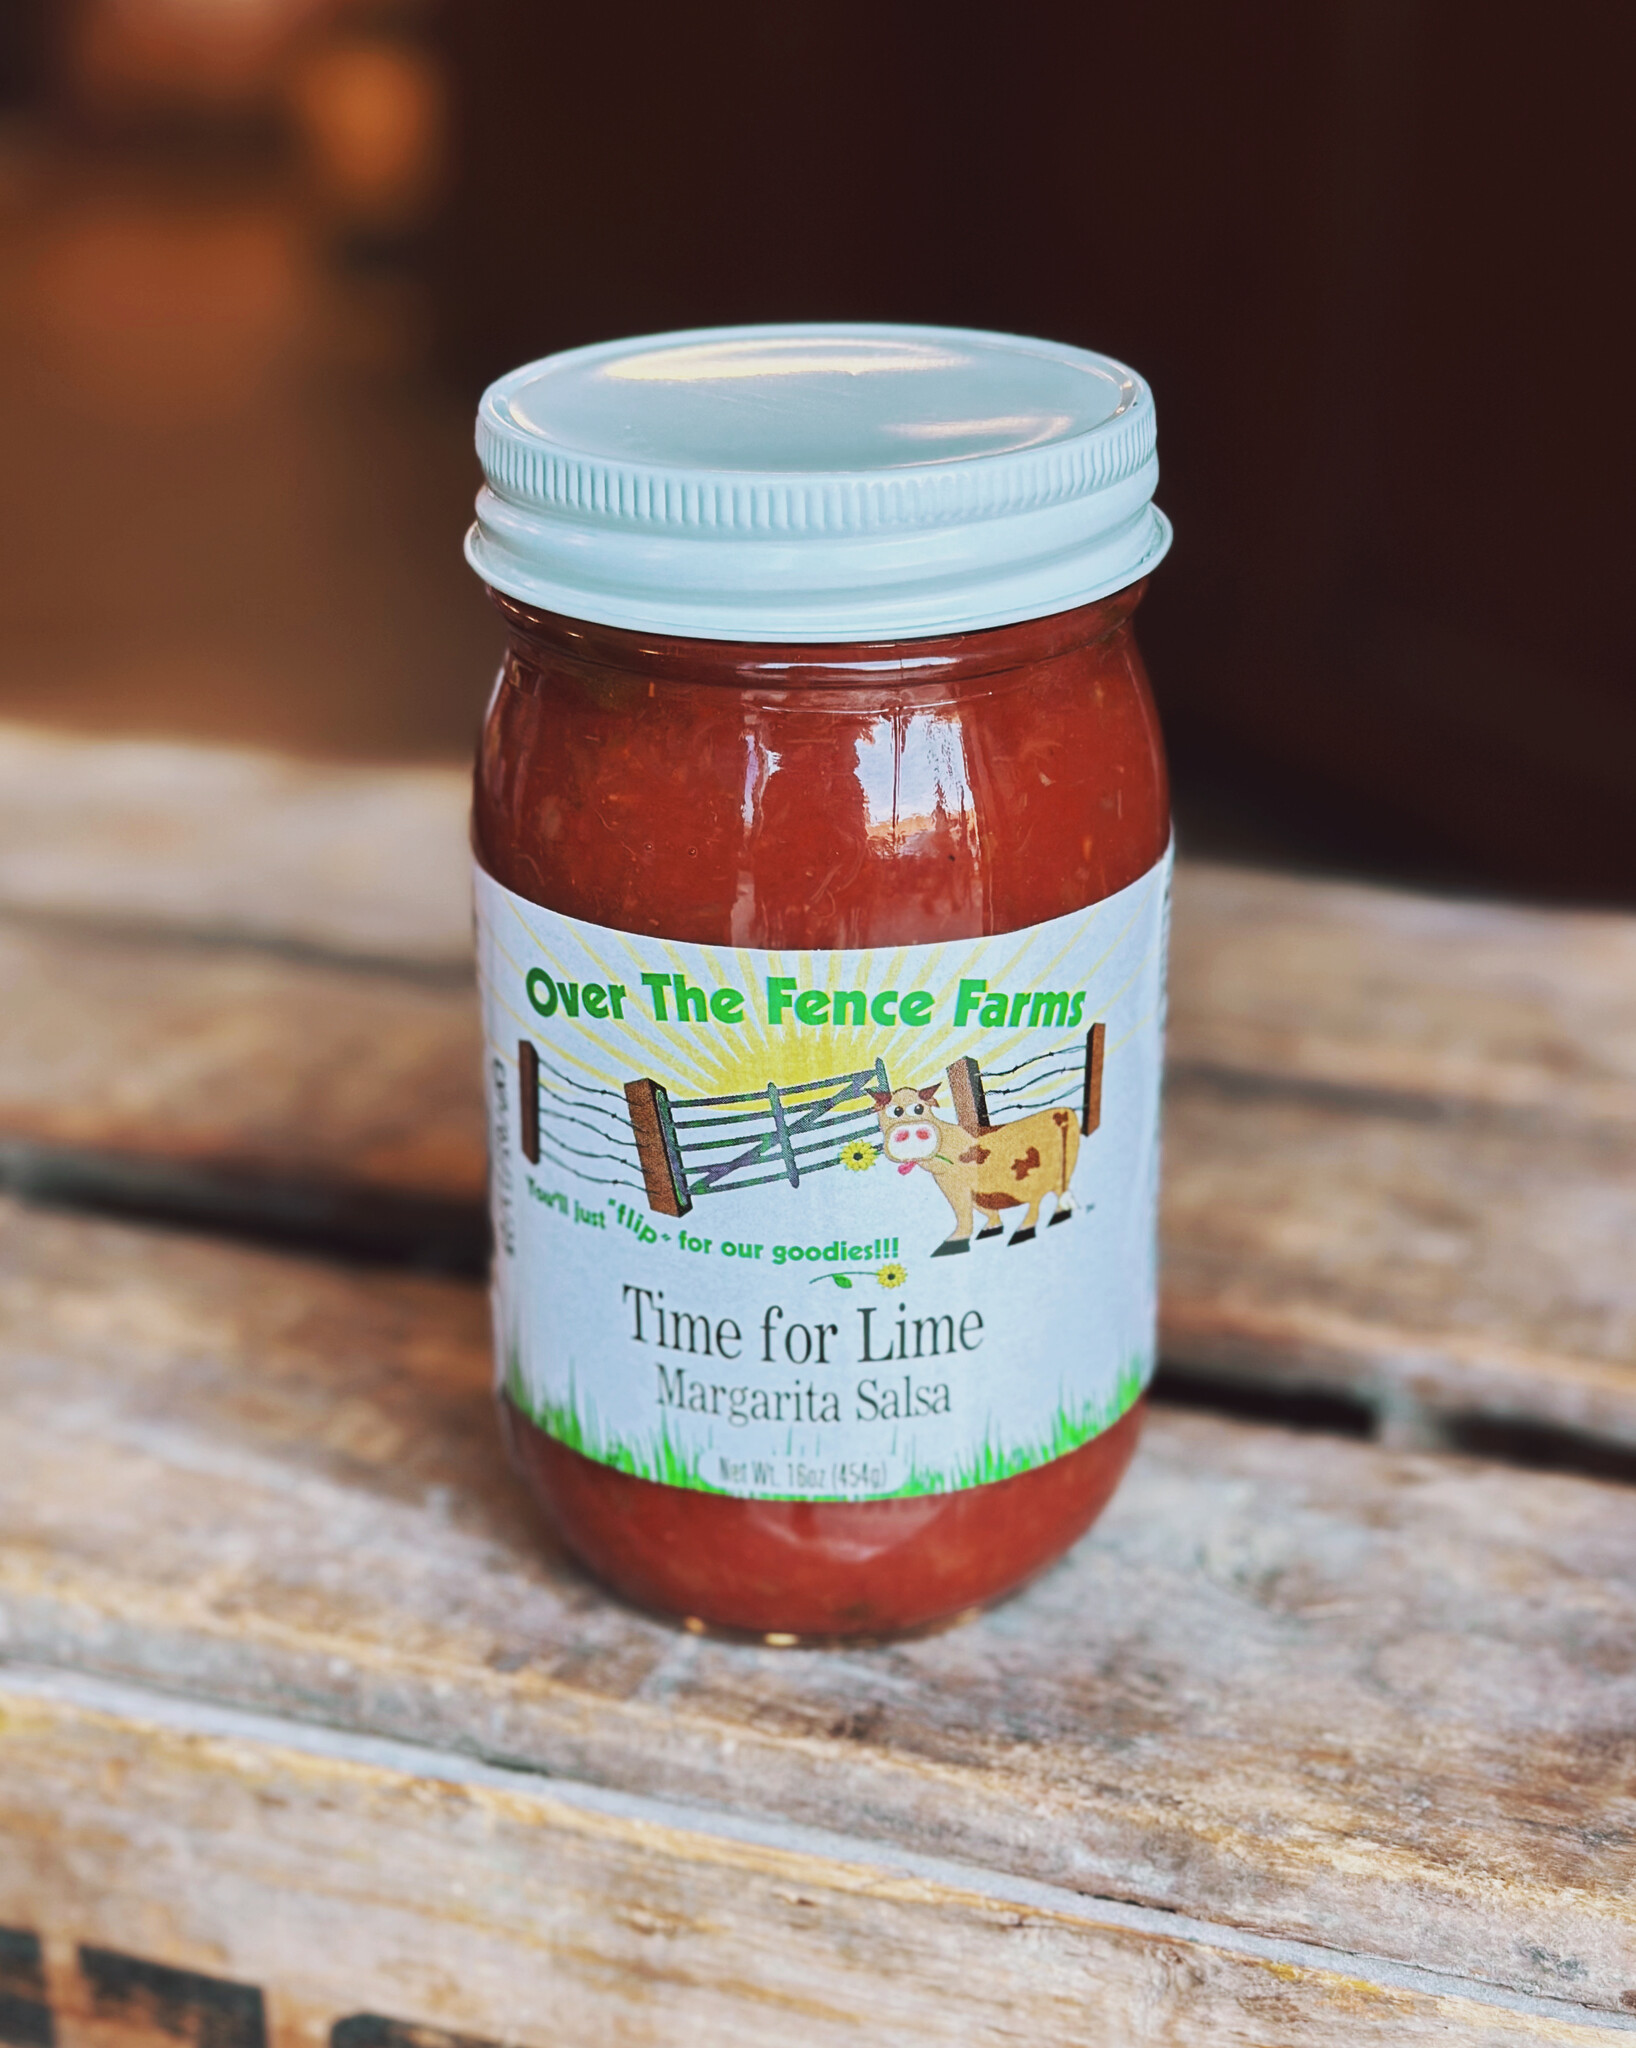 Over The Fence Farms Time for Lime Margarita Salsa